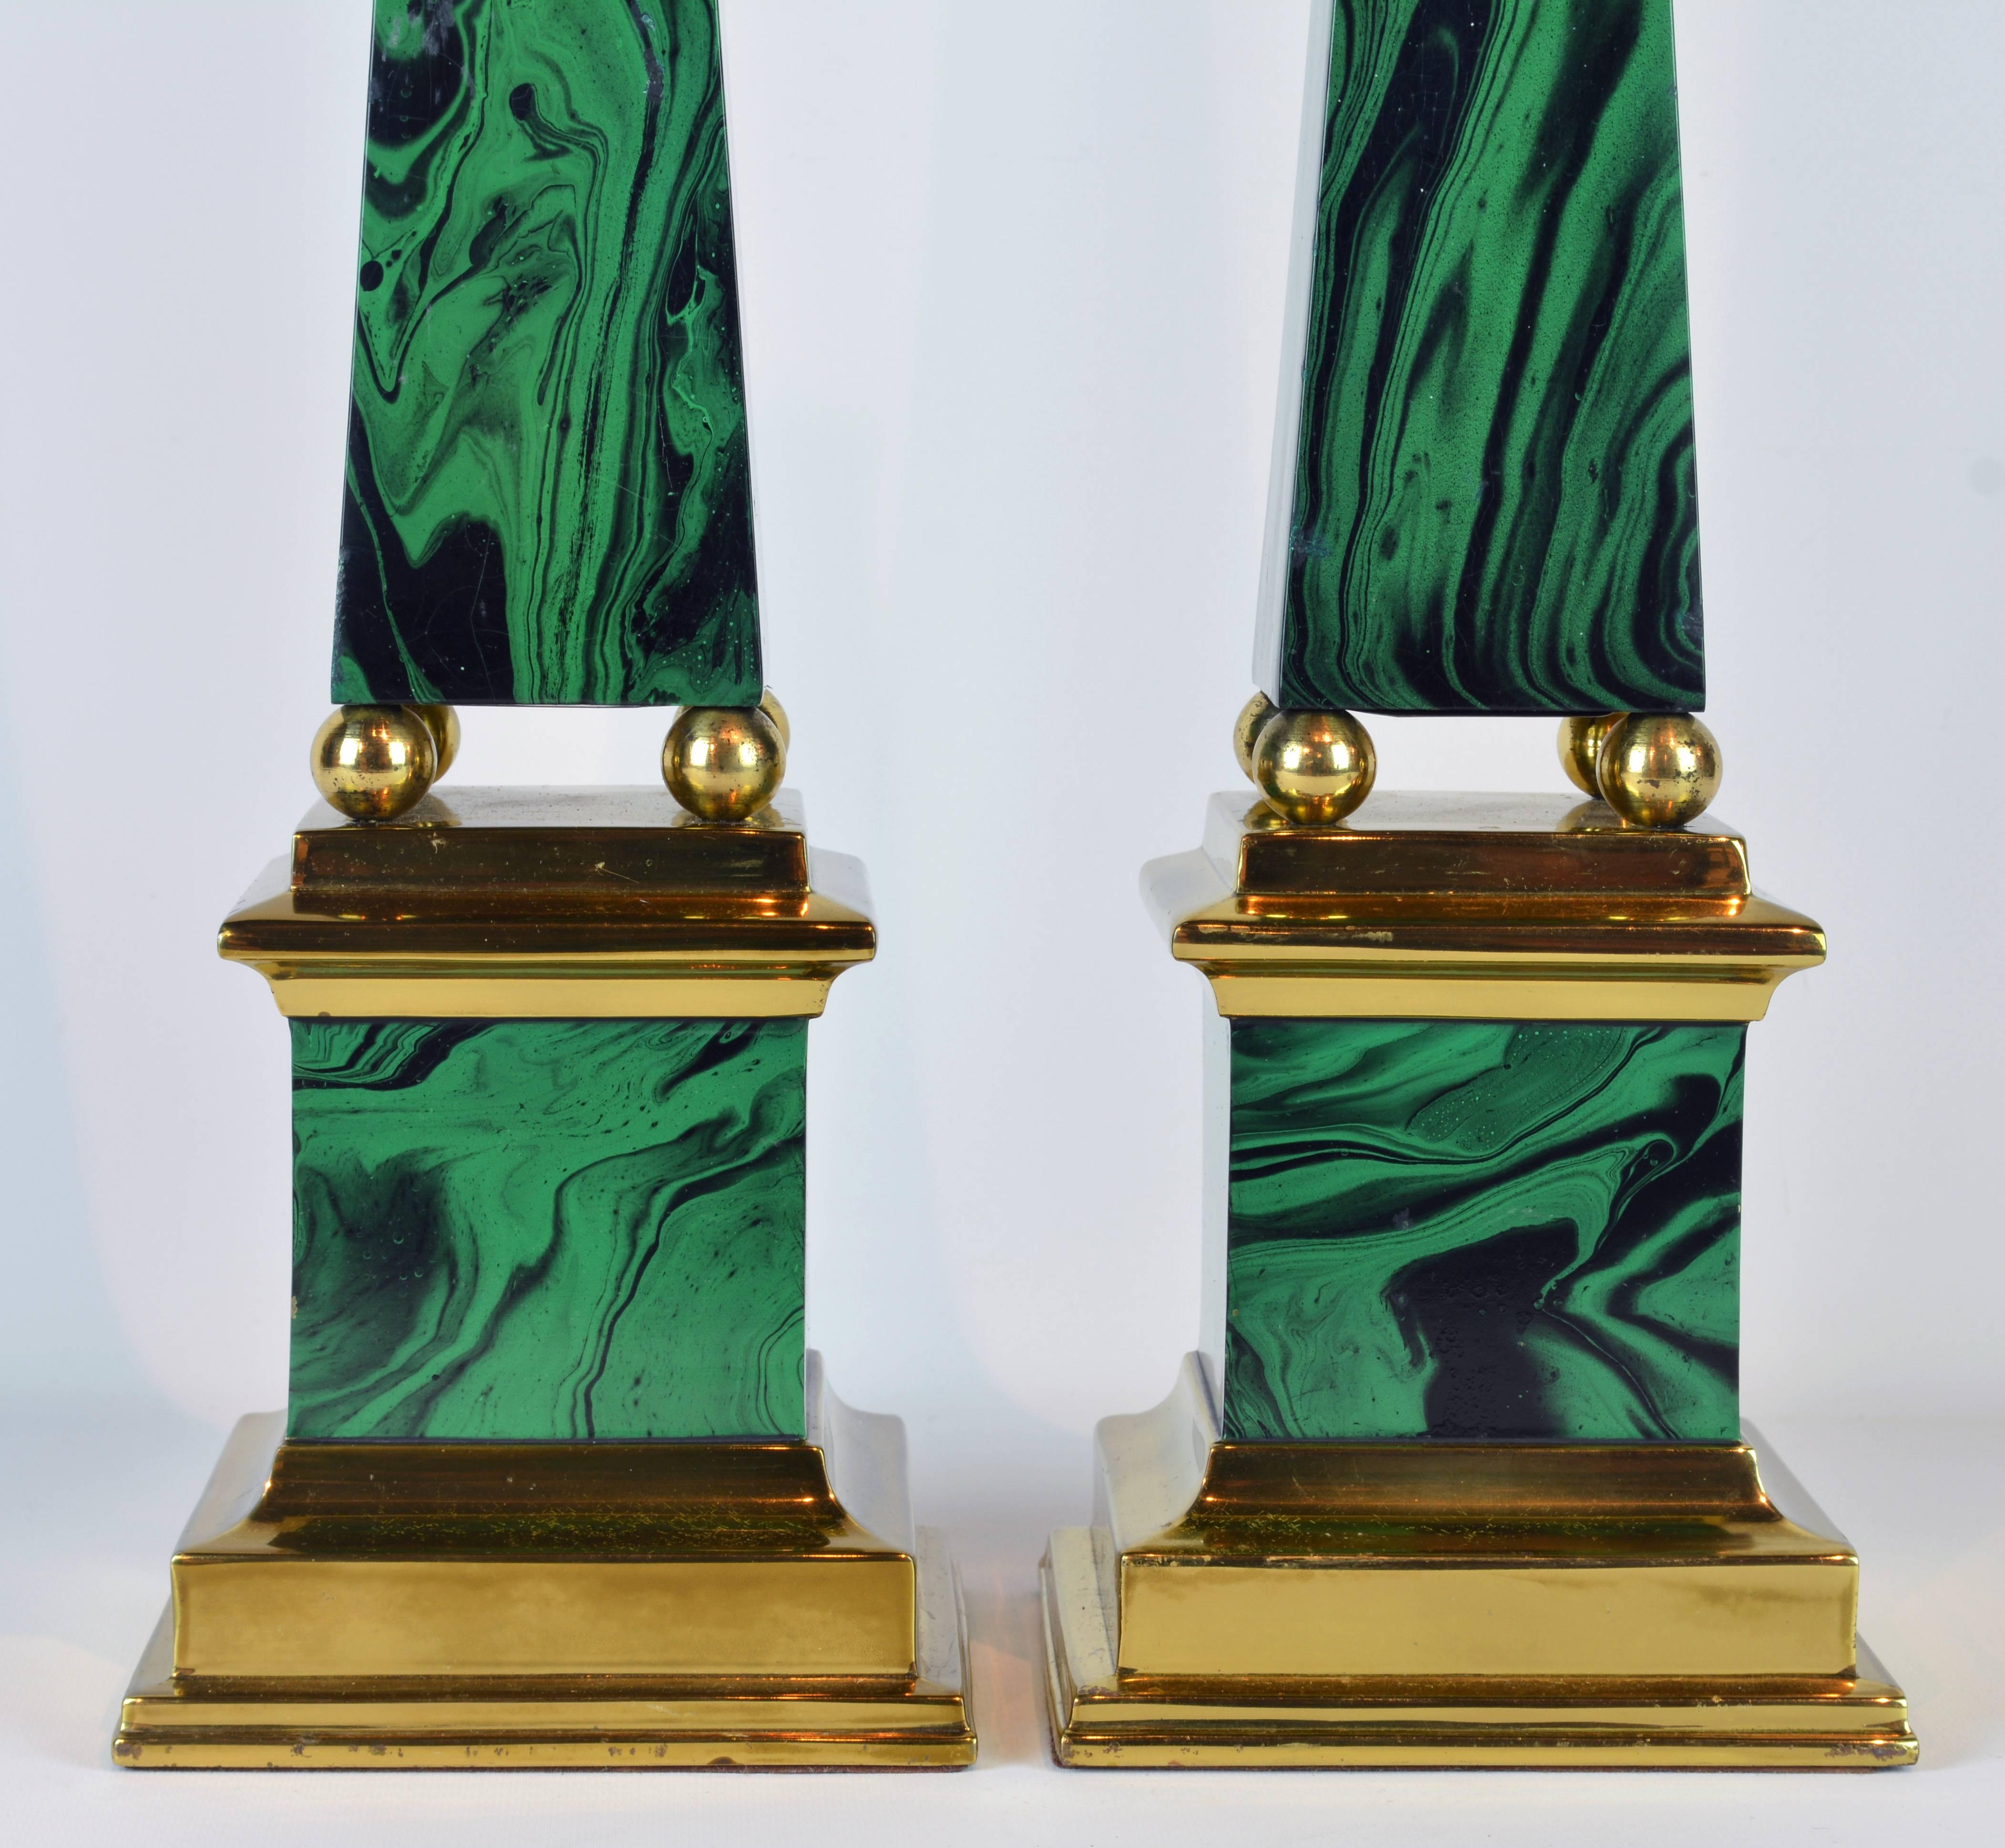 Neoclassical Pair of Tall Paul Hanson Midcentury Faux Malachite and Brass Obelisk Models